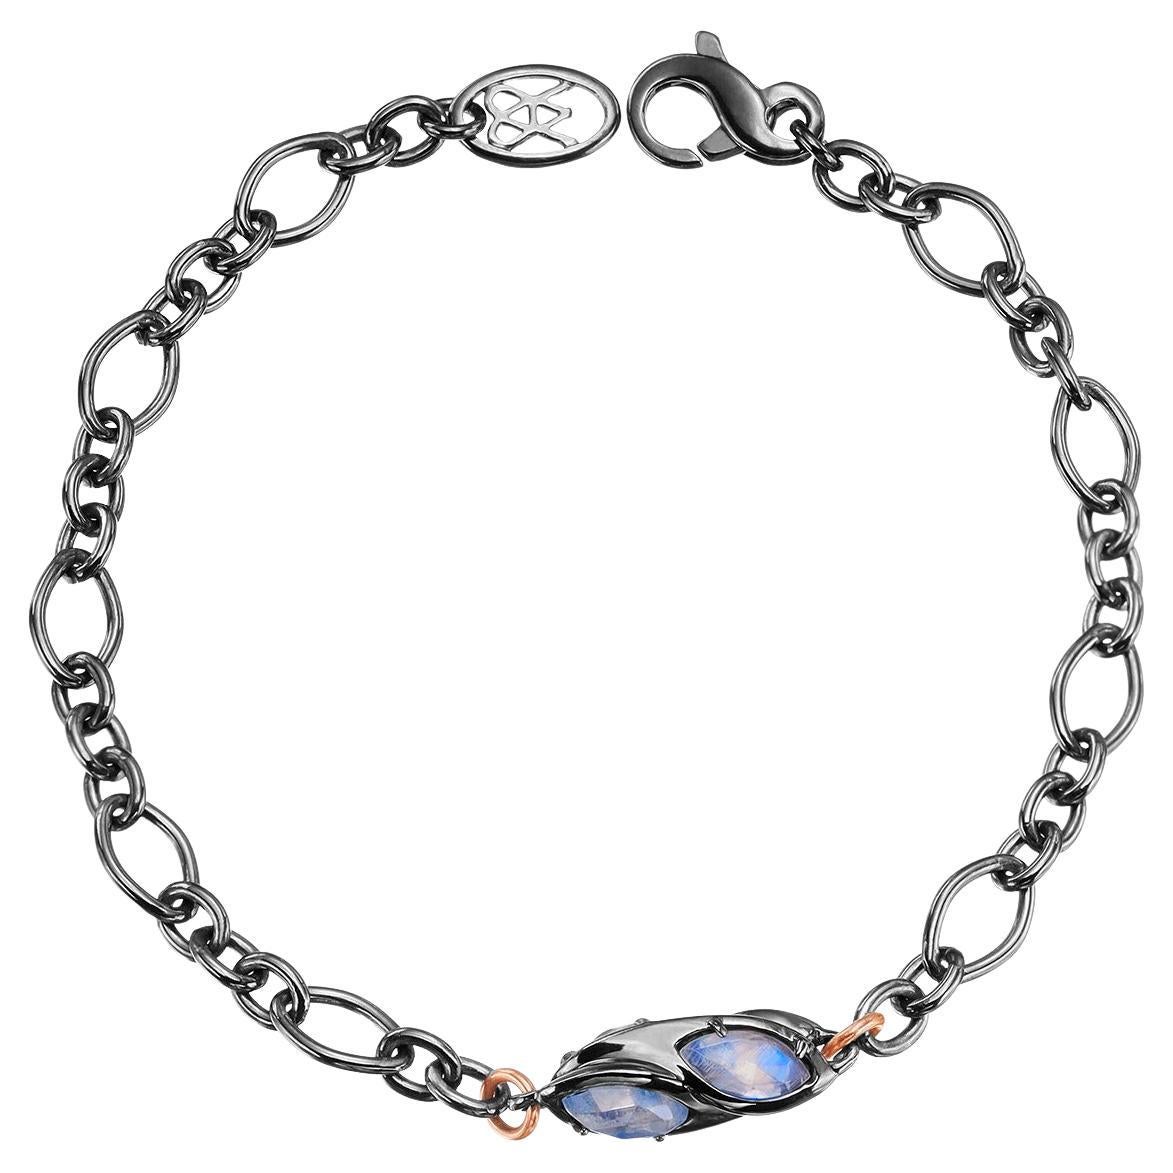 Sterling Silver Chain Bracelet W/ Rose Cut Moonstone Marquise Set in Sculpture For Sale